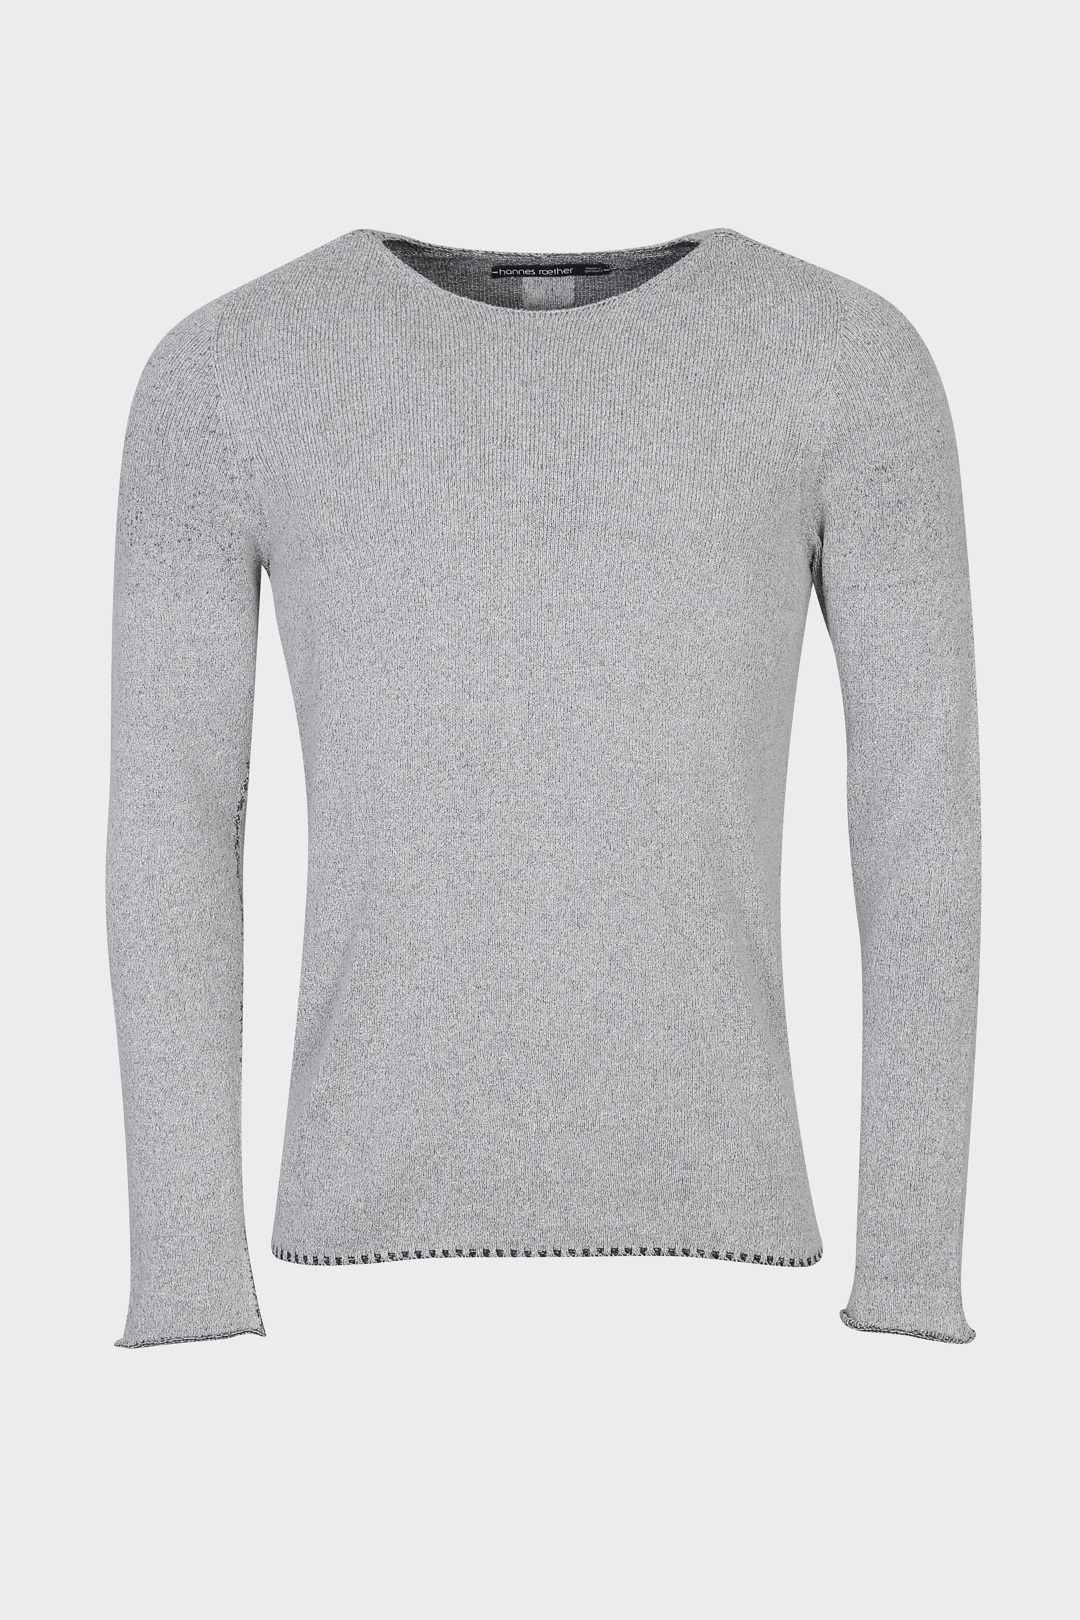 HANNES ROETHER Knit Sweater in Light Grey 3XL